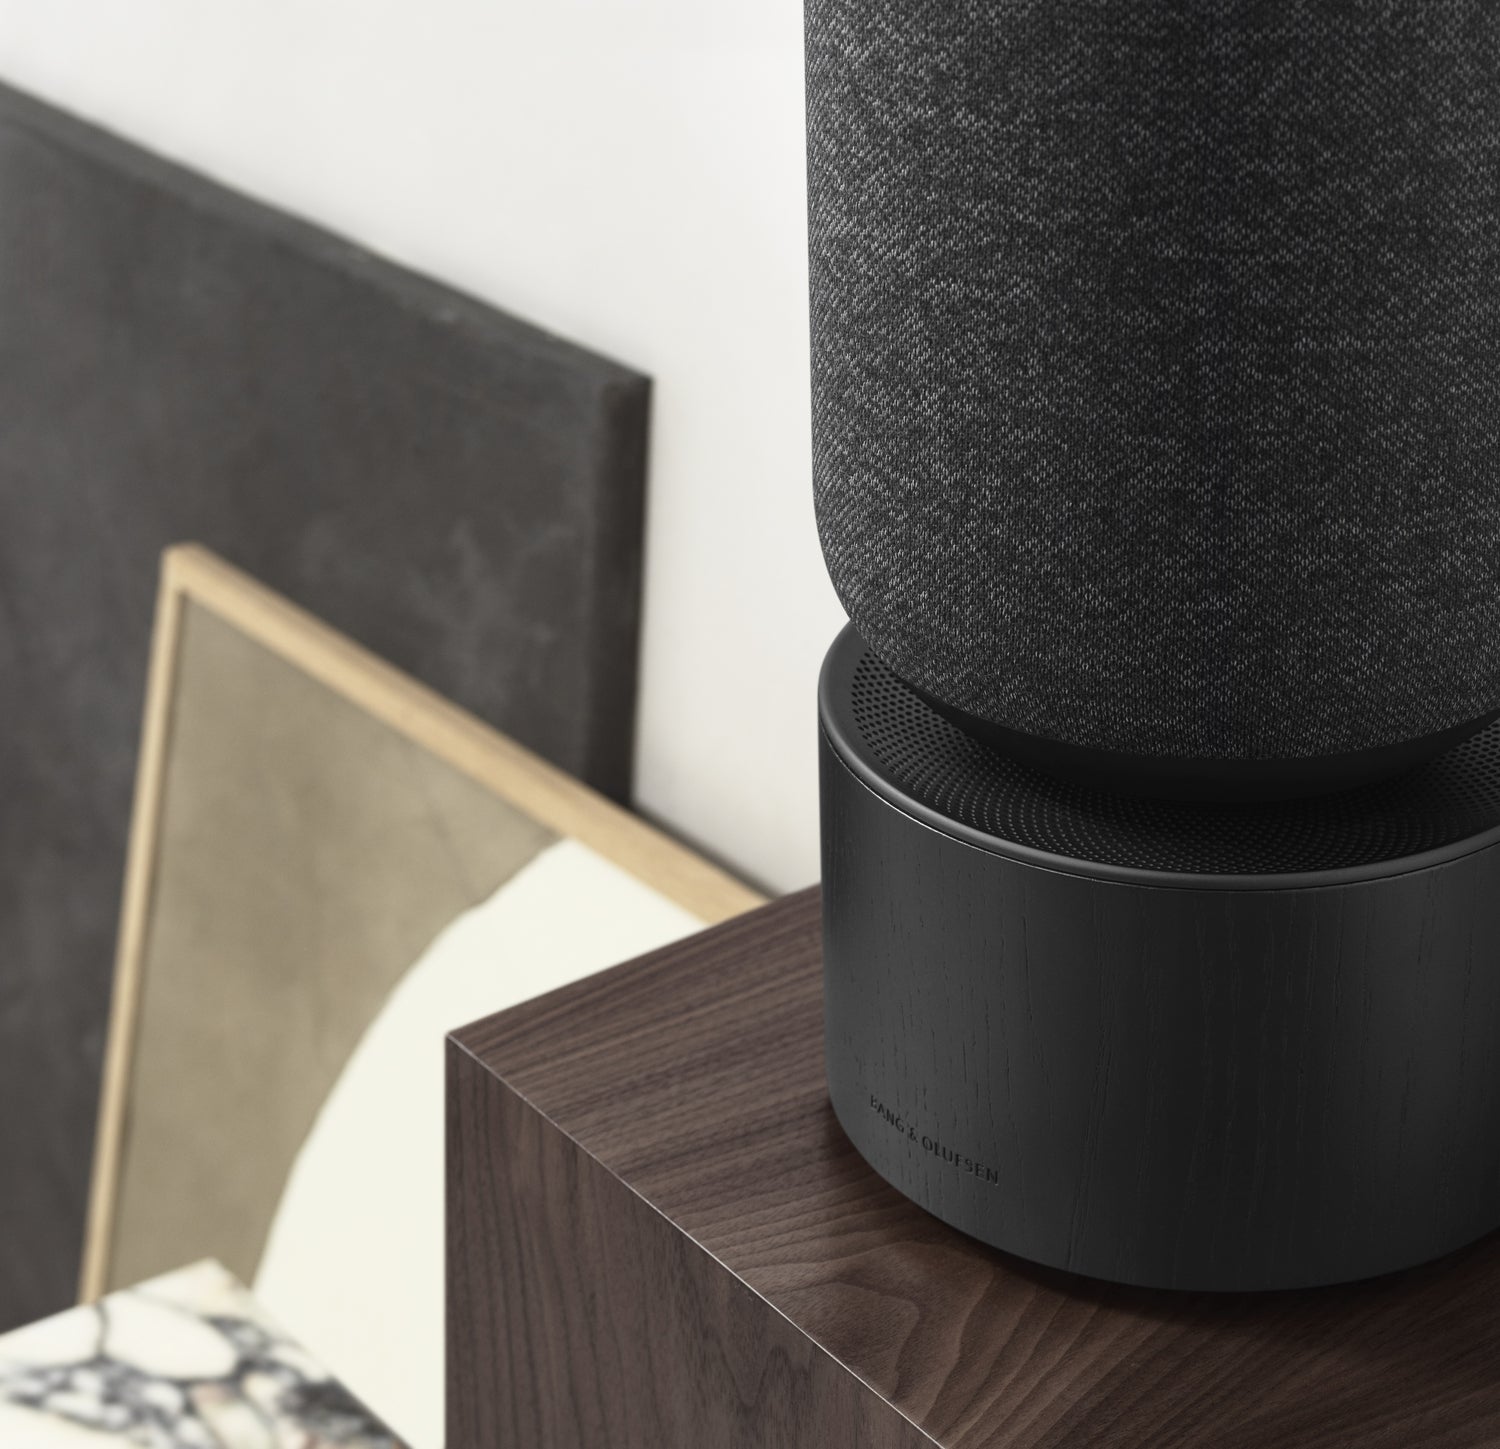 Beosound Balance - Connected Speakers Speakers